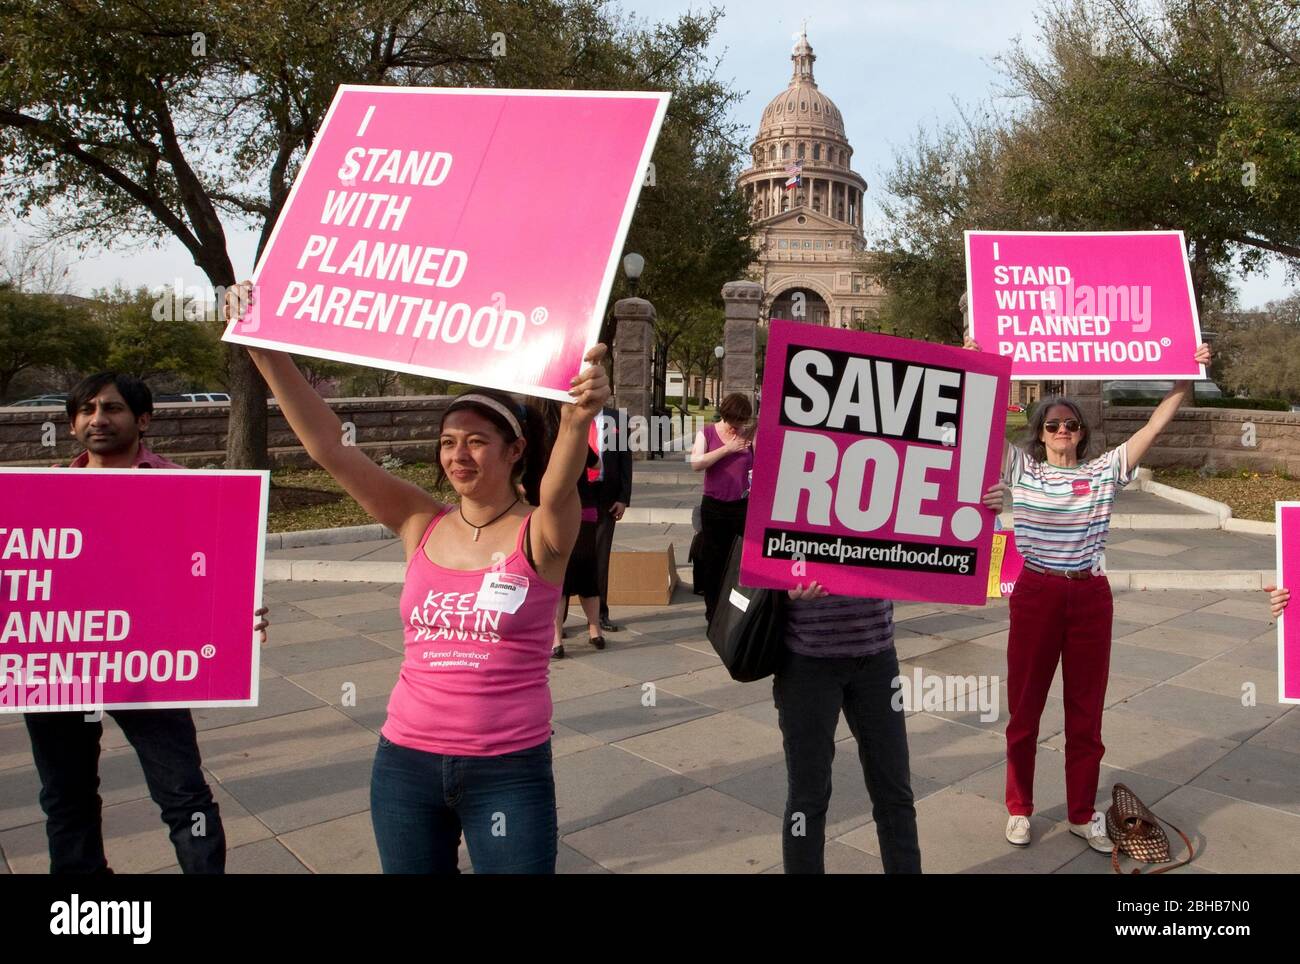 Austin , Texas - March 8 , 2011   - Pro-planned parenthood demonstrator at the Texas Capitol buidling  © Marjorie Kamys Cotera  /  Daemmrich Photos Stock Photo